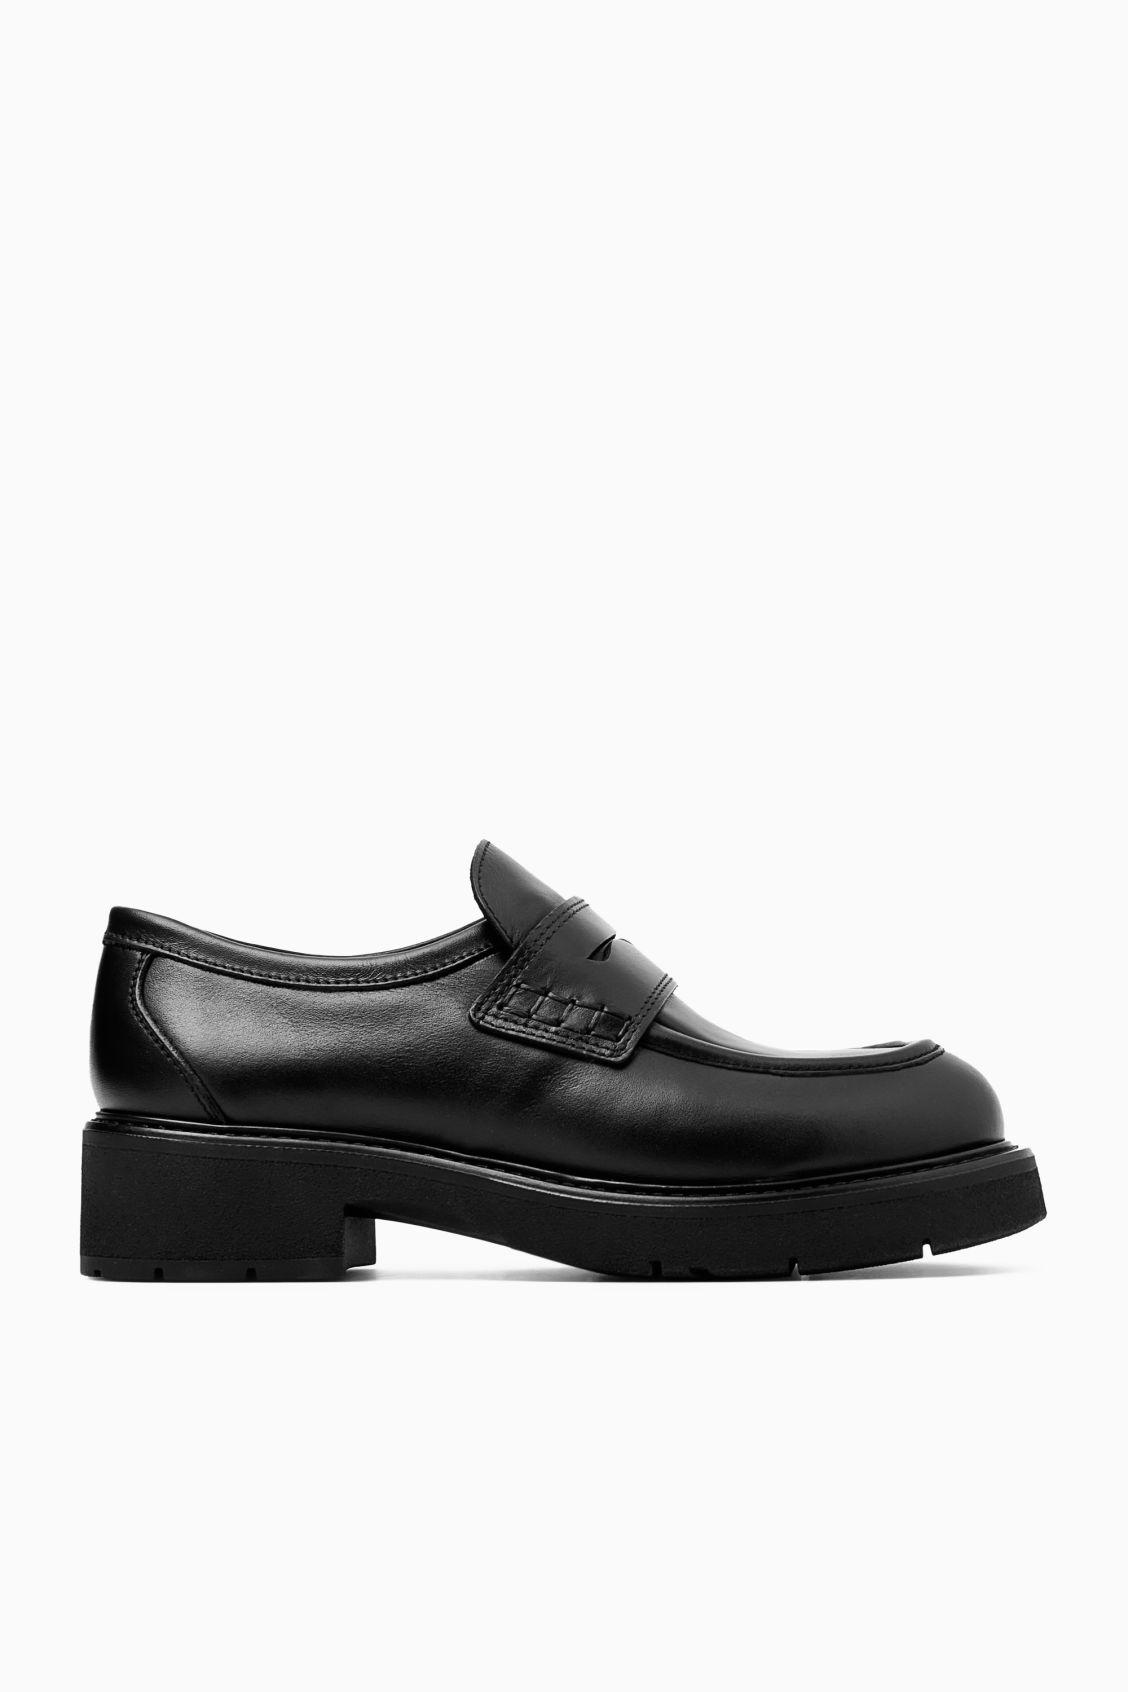 COS Chunky Leather Penny Loafers in Black | Lyst